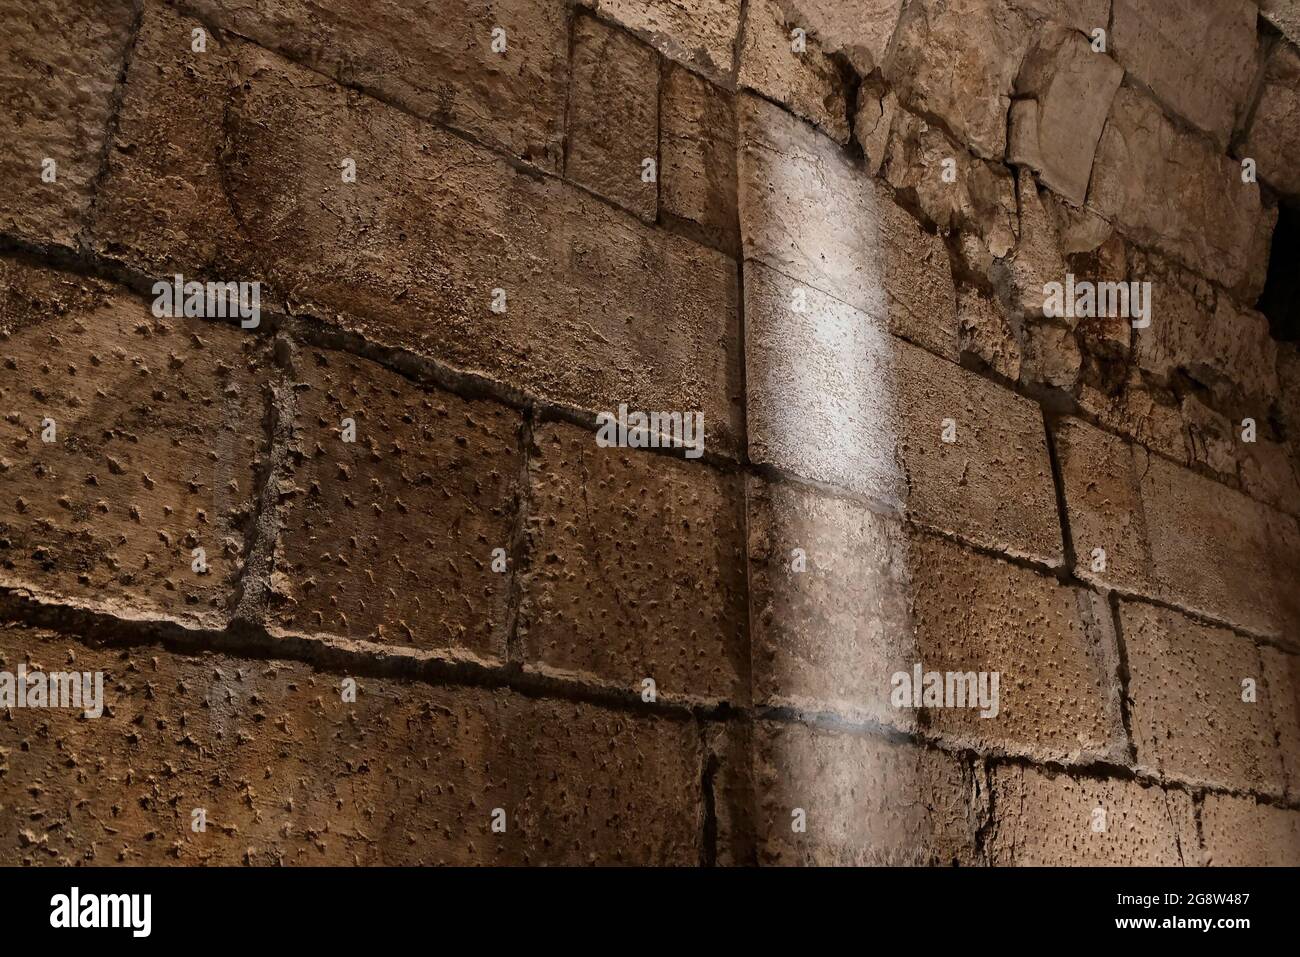 Pillars sticking out of the wall inside a Second Temple period (516 BC-AD 70) public building, that has ever been uncovered outside the Temple Mount walls on July 21, 2021, in Jerusalem, Israel. Israeli archaeologists unveiled new parts of a major public building just metres from where the Second Jewish Temple is believed to have stood two millennia ago. The opulent hall used by notable members of society on their way to worship is the latest discovery to be made public by the Israeli Antiquities Authority (IAA) from what it refers to as the Western Wall Tunnels. Stock Photo